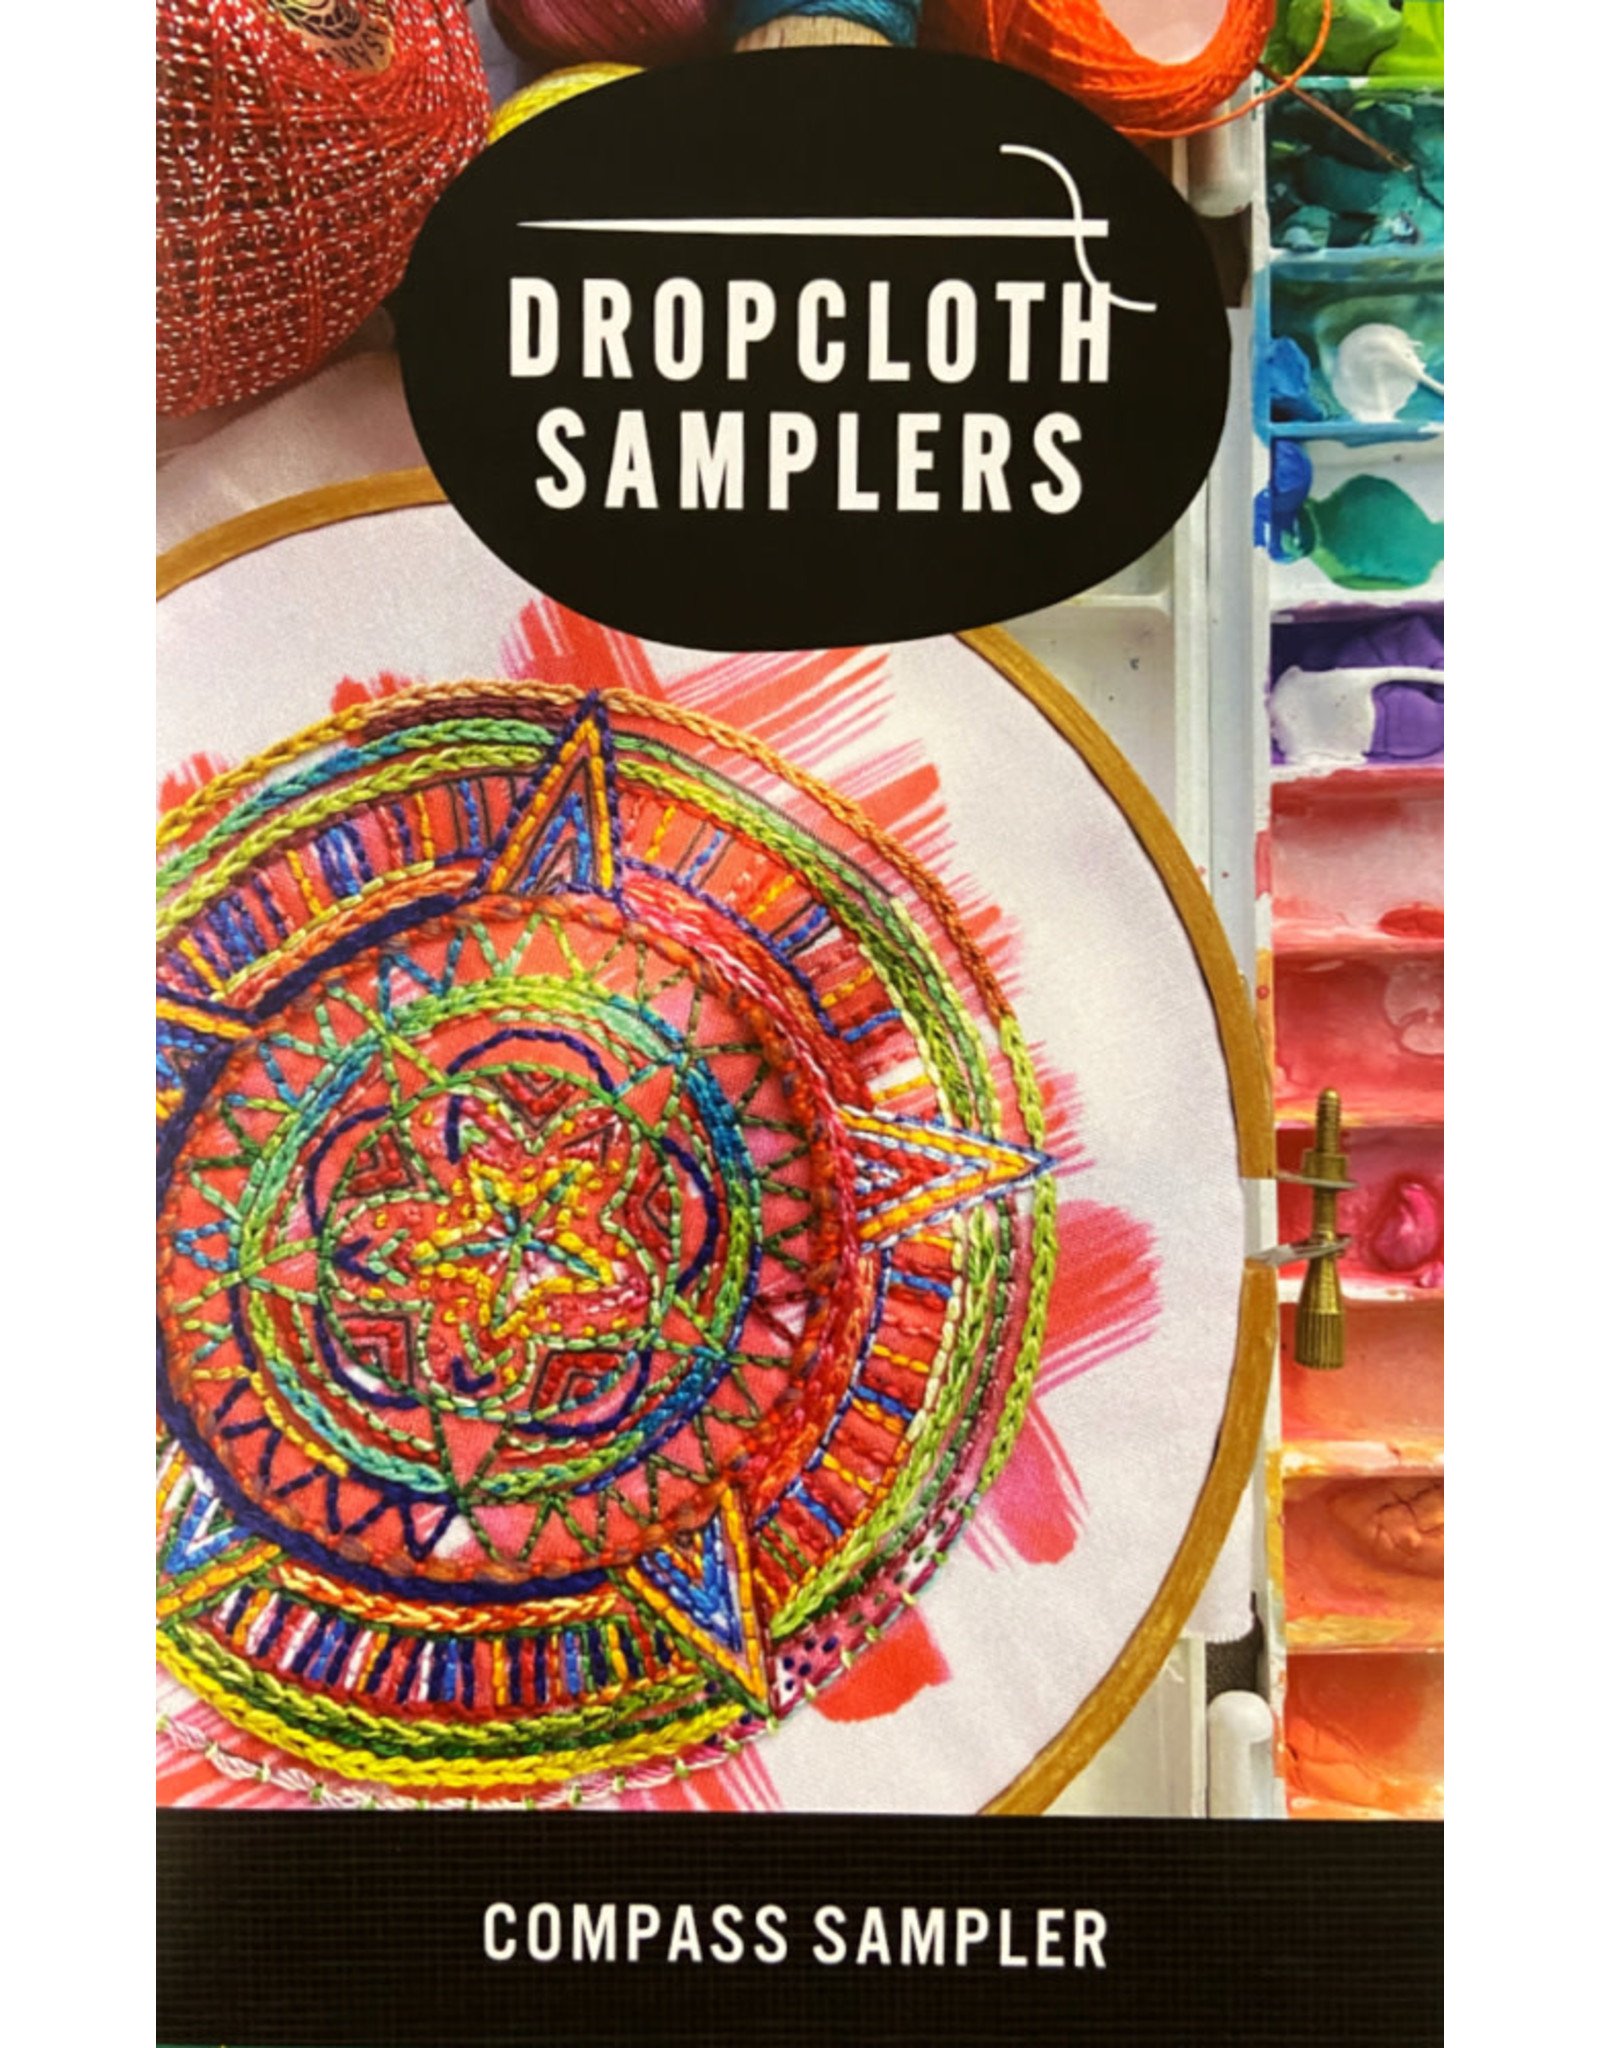 Dropcloth Samplers Compass Sampler,  Embroidery Sampler from Dropcloth Samplers